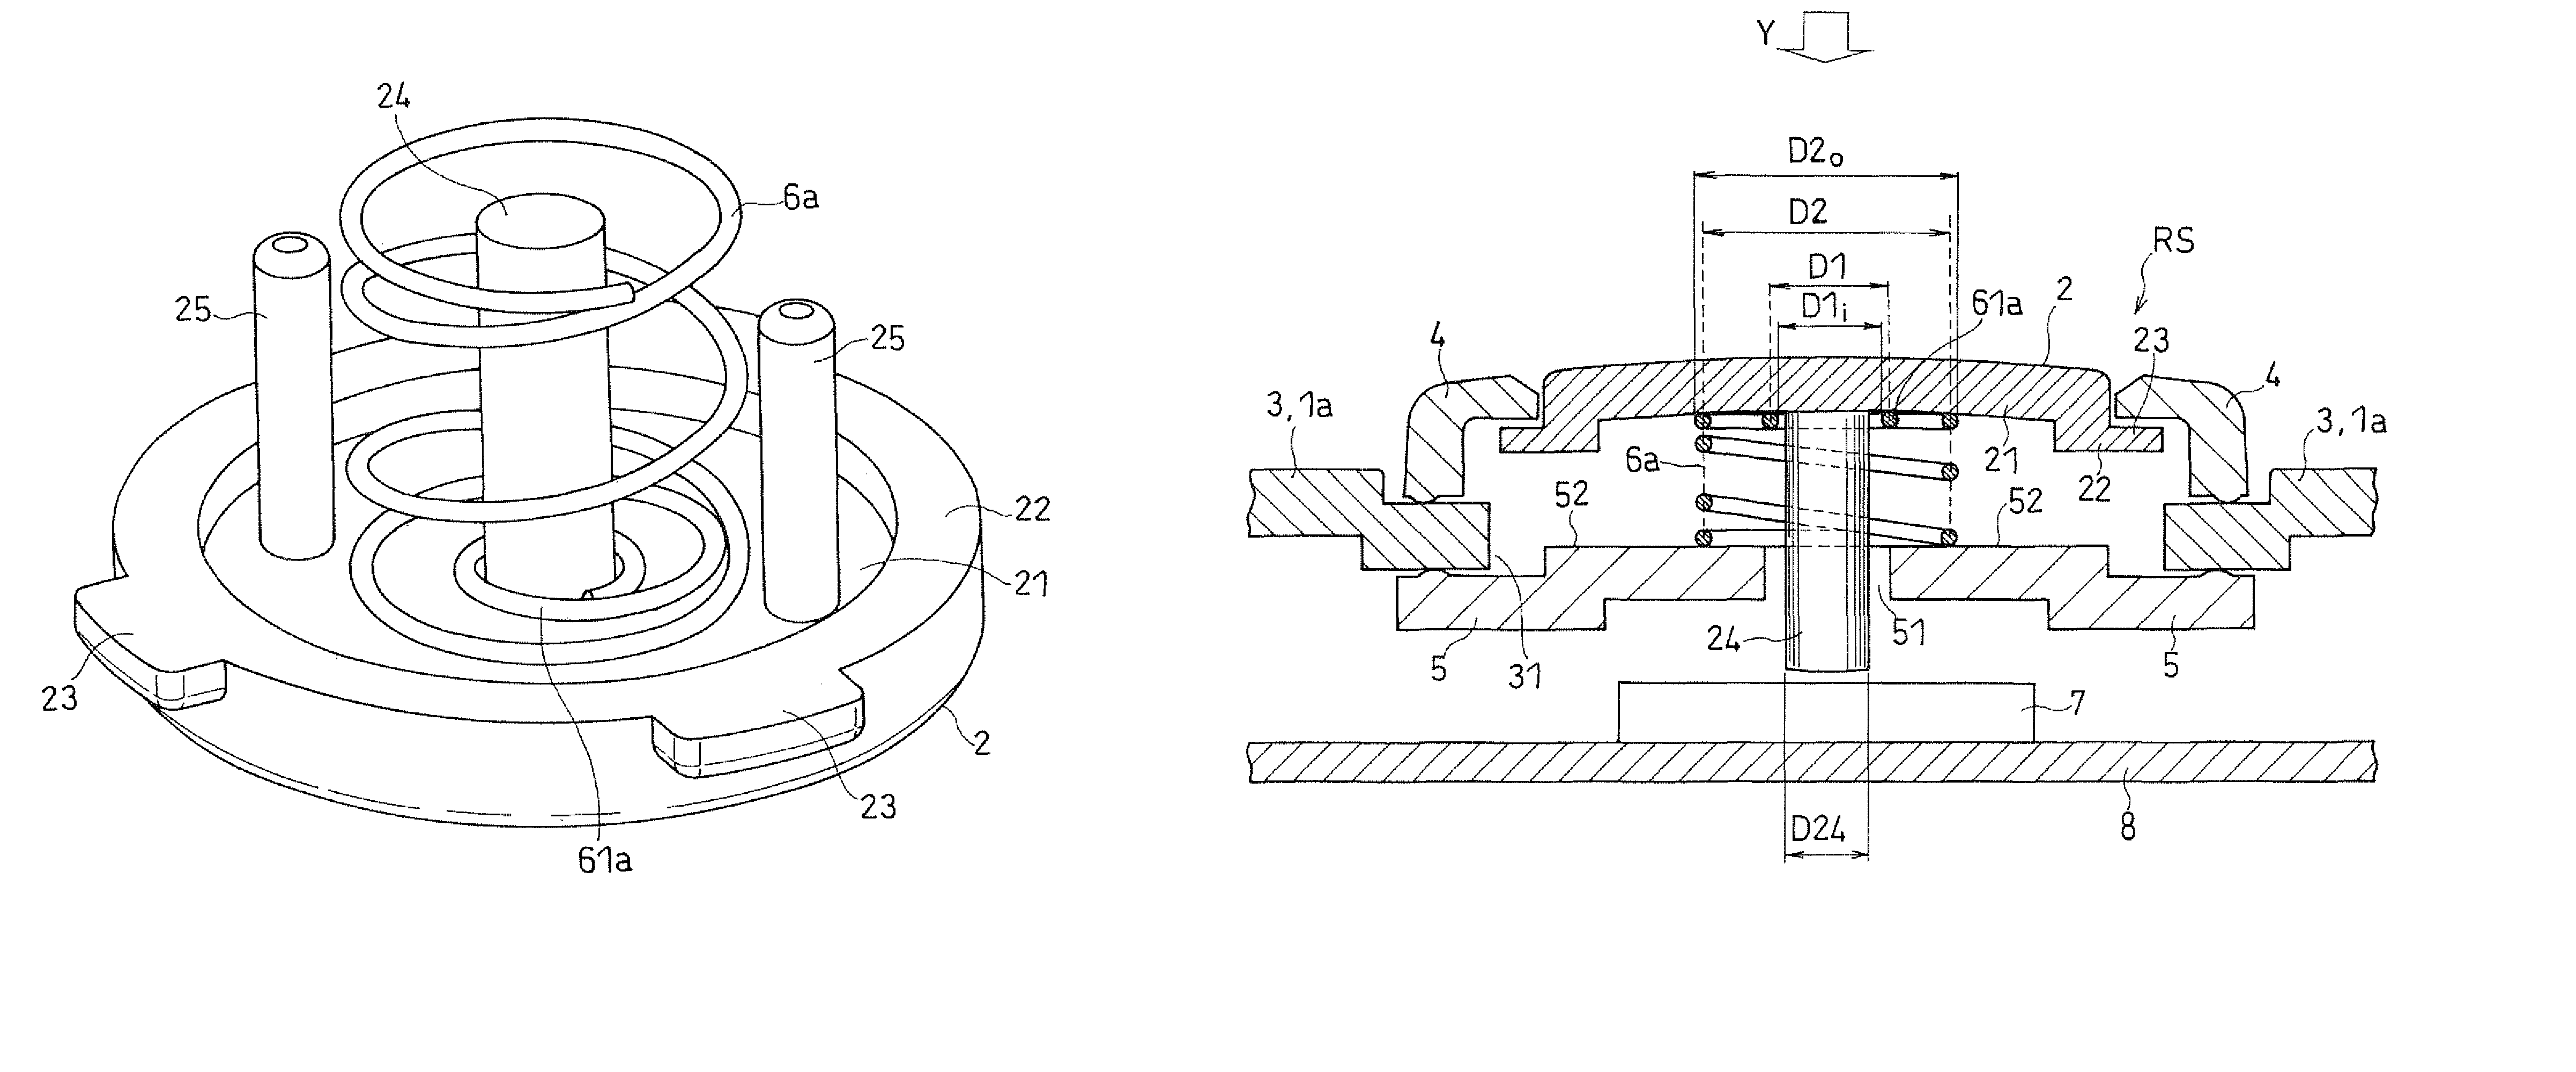 Coil spring structure of shutter button camera device and button structure of electronic device